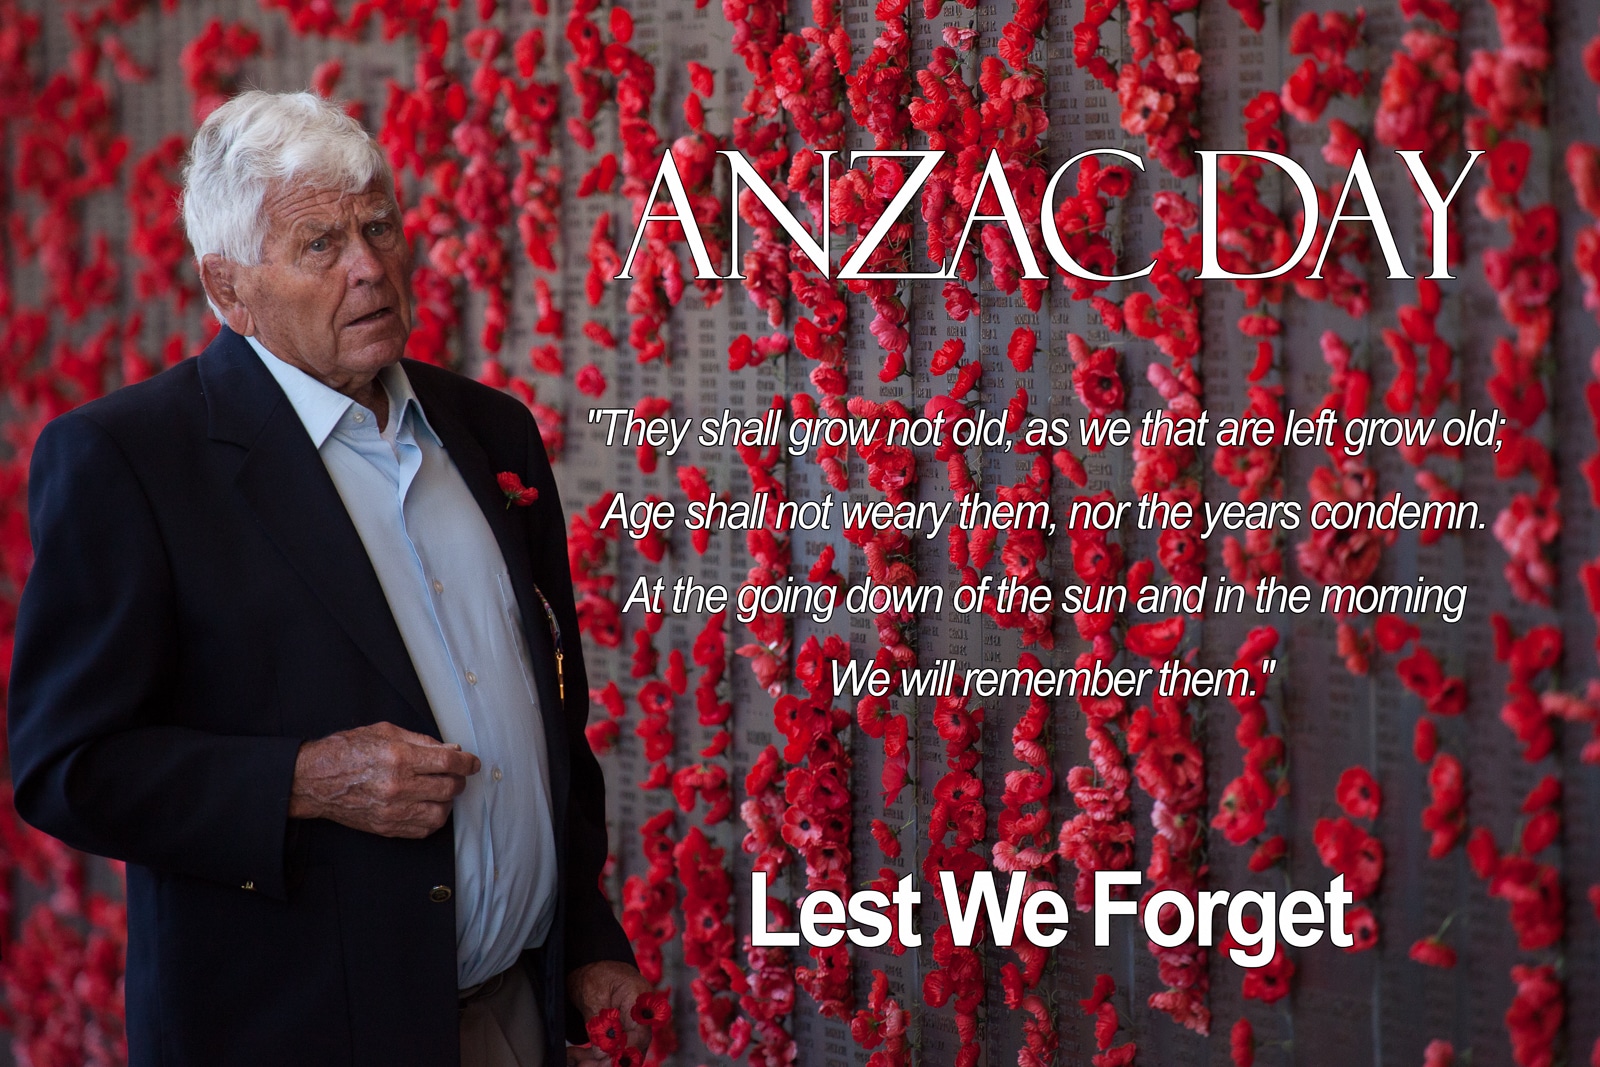 ANZAC Day - Lest We Forget